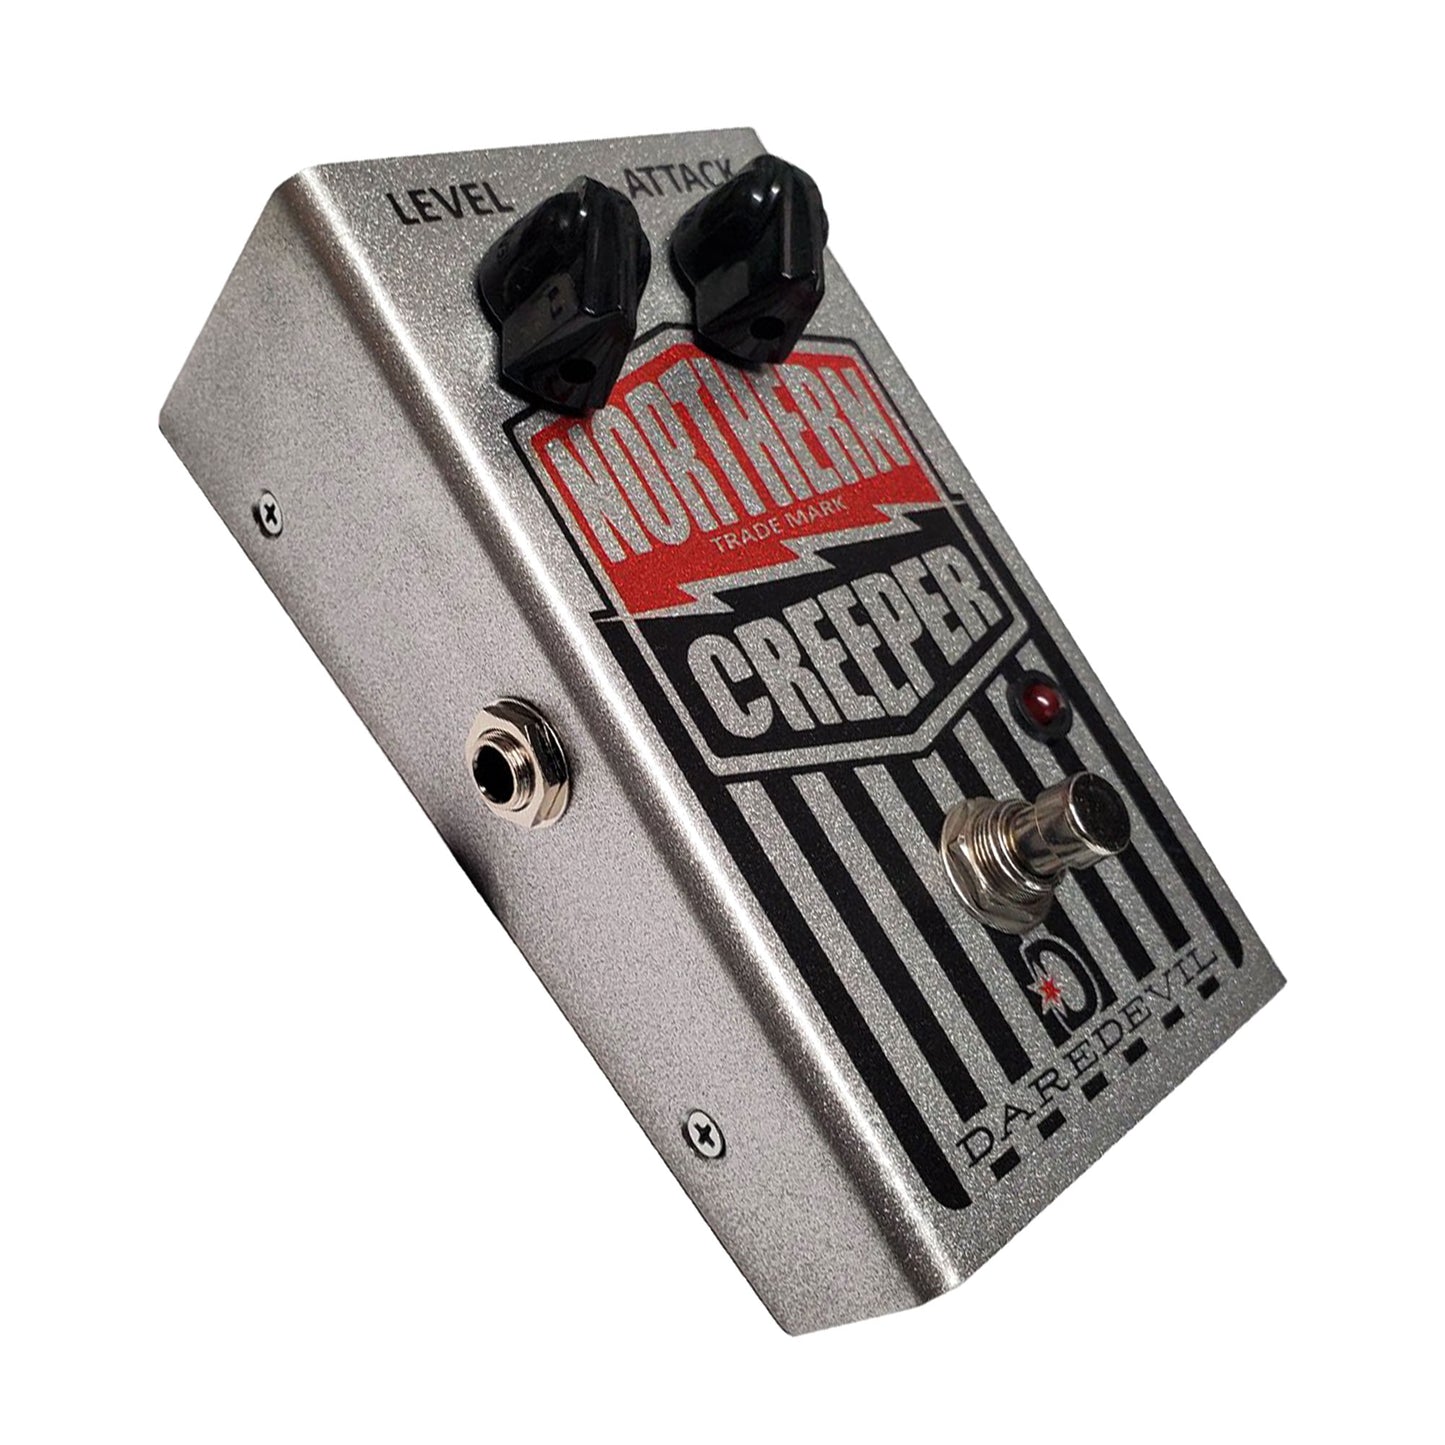 Daredevil Pedal Northern Creeper Wedge Fuzz Pedal